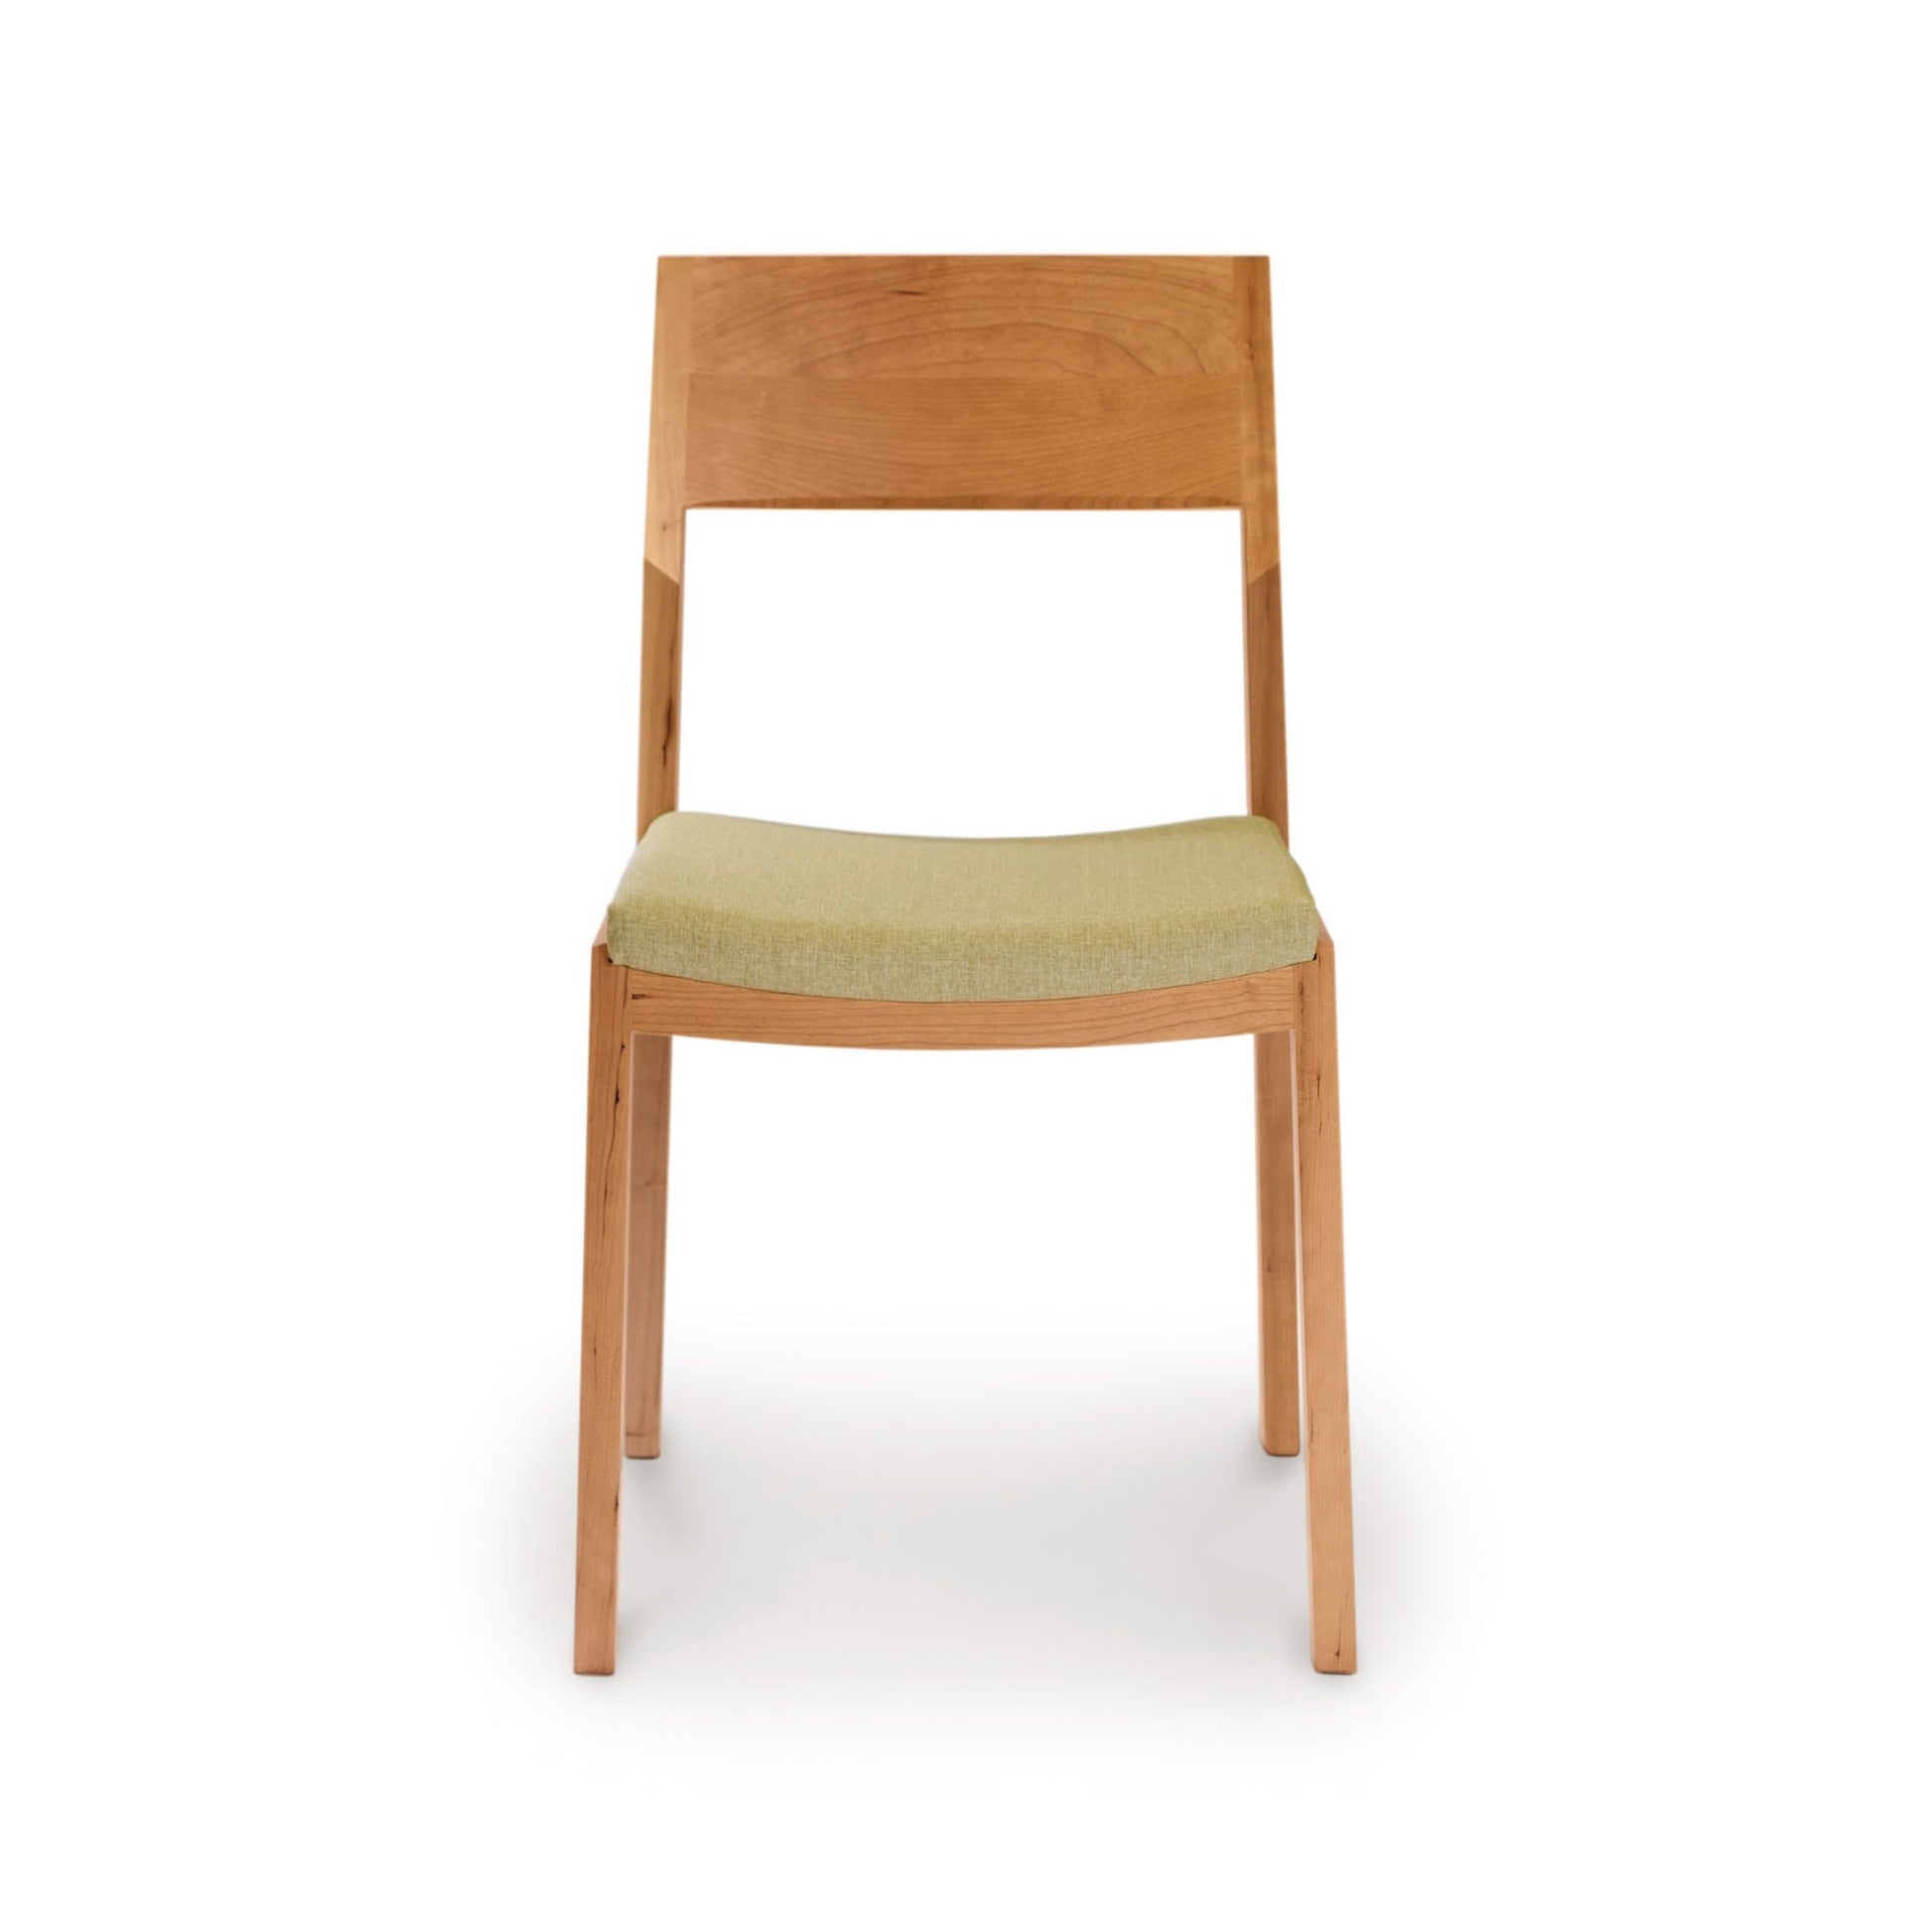 An Iso Chair - Priority Ship by Copeland Furniture, featuring a cherry wood frame and a green upholstered seat, made using sustainably sourced hardwoods.